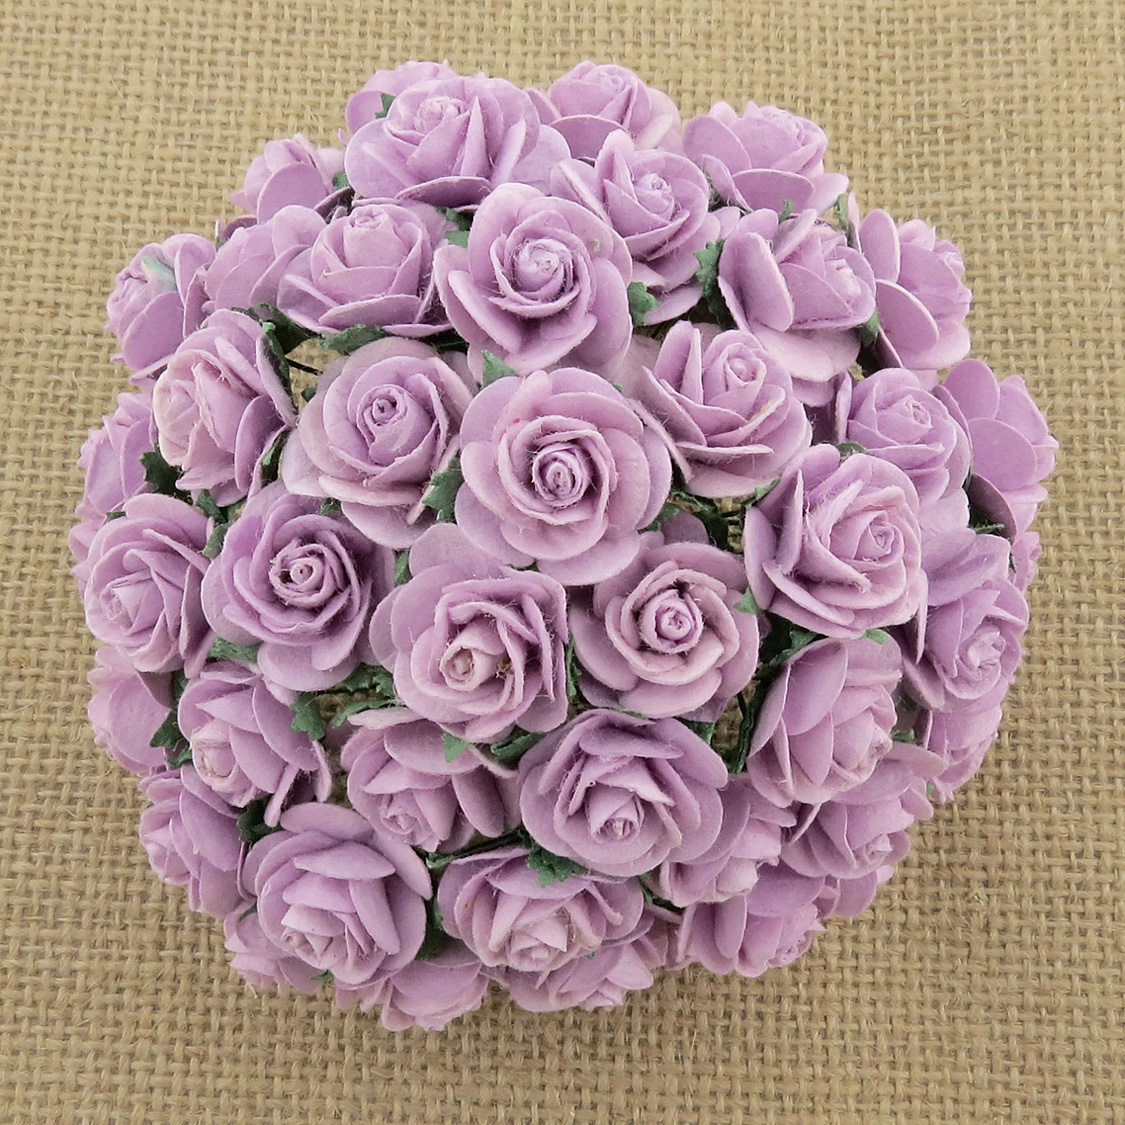 100 LILAC MULBERRY PAPER OPEN ROSES